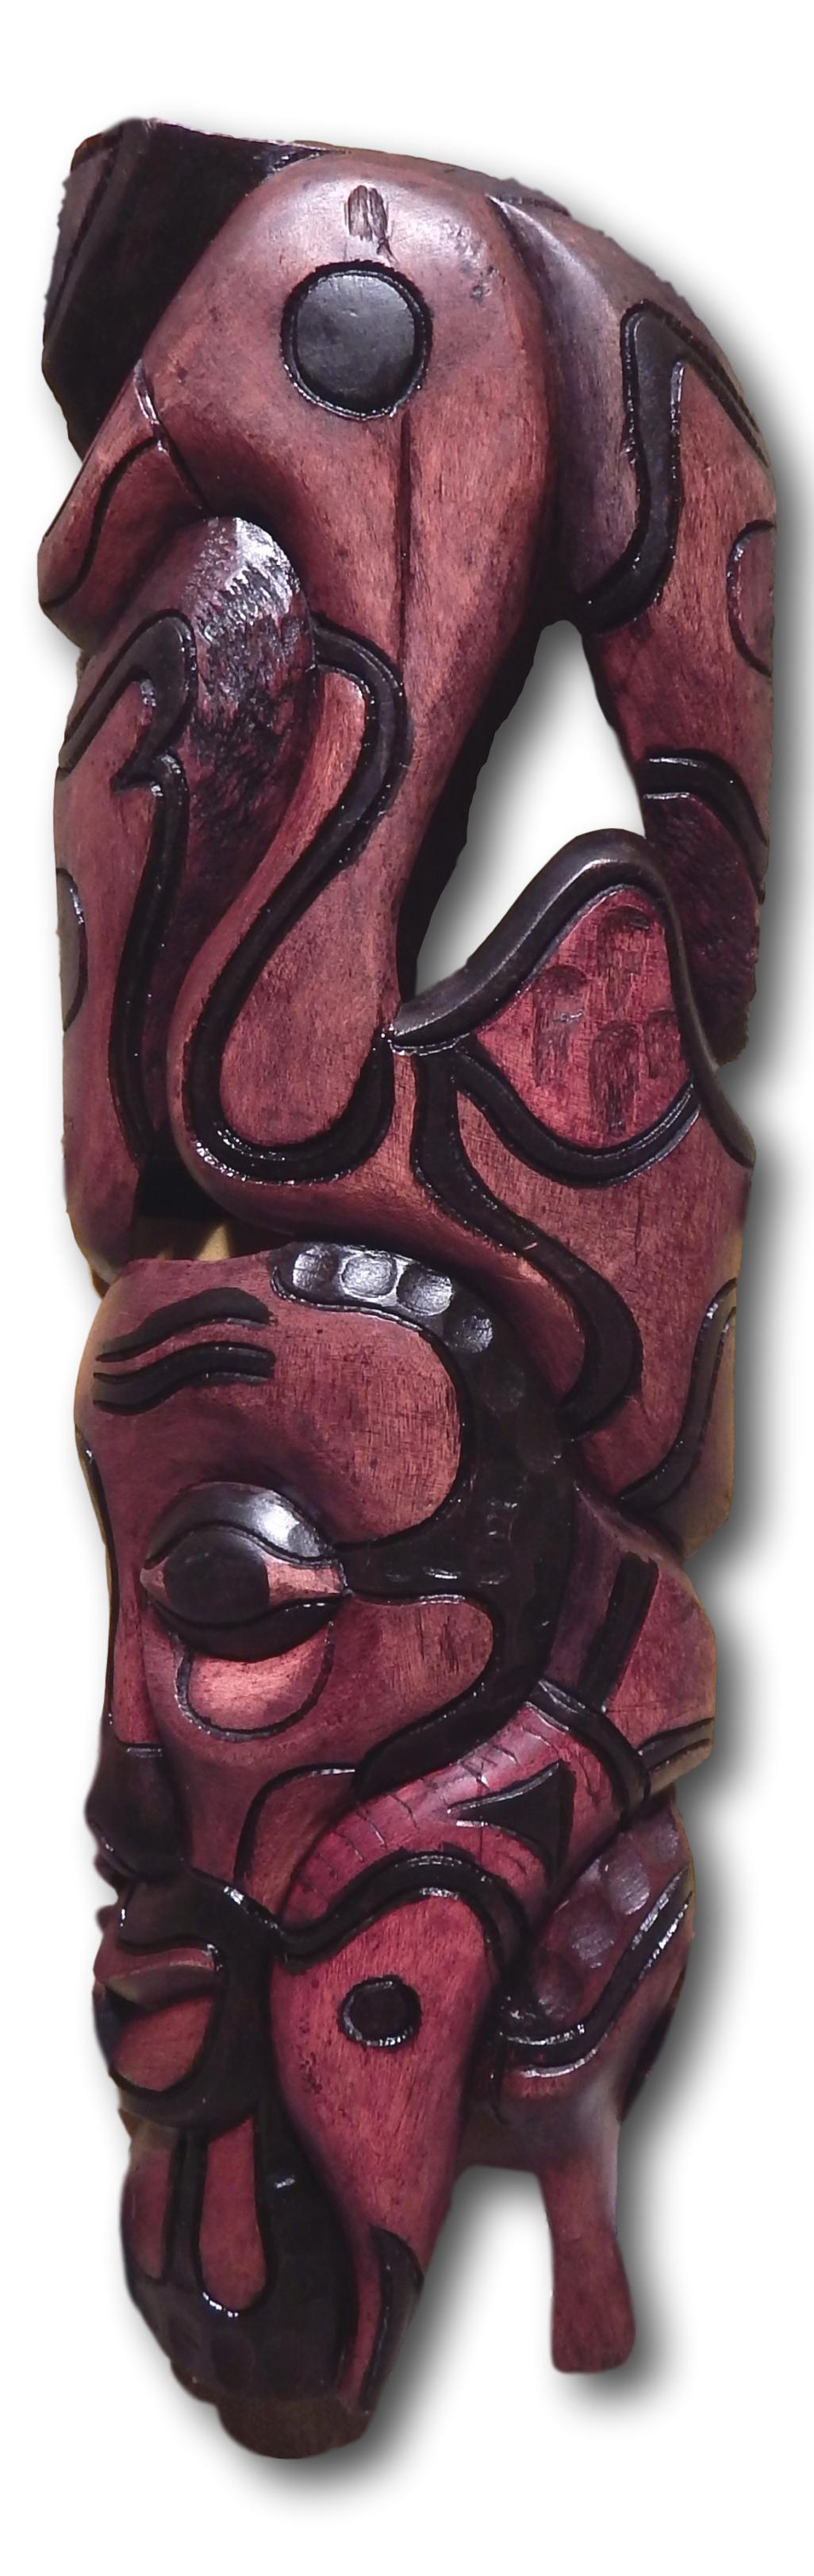 Mask art decoration handcrafted from Seringa wood